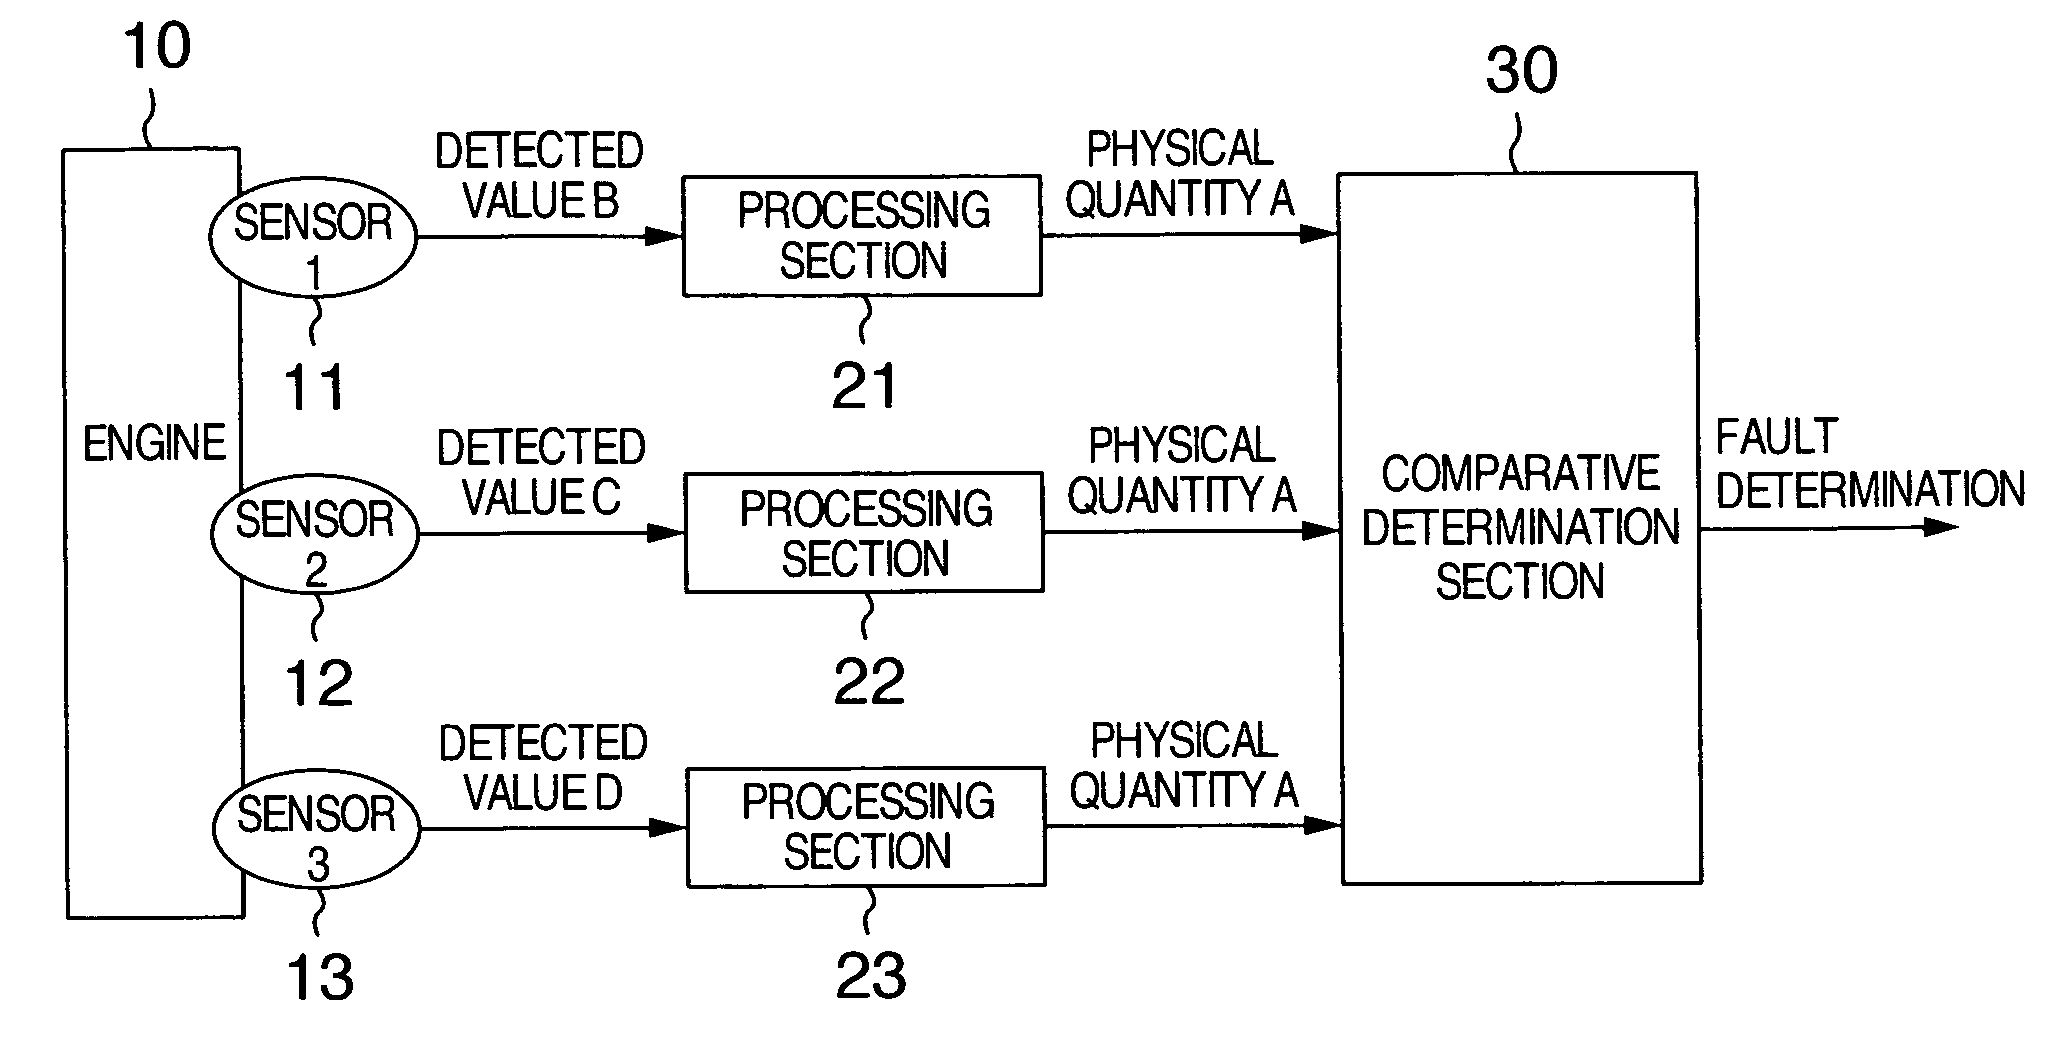 Fault diagnosis apparatus for sensors used in a system